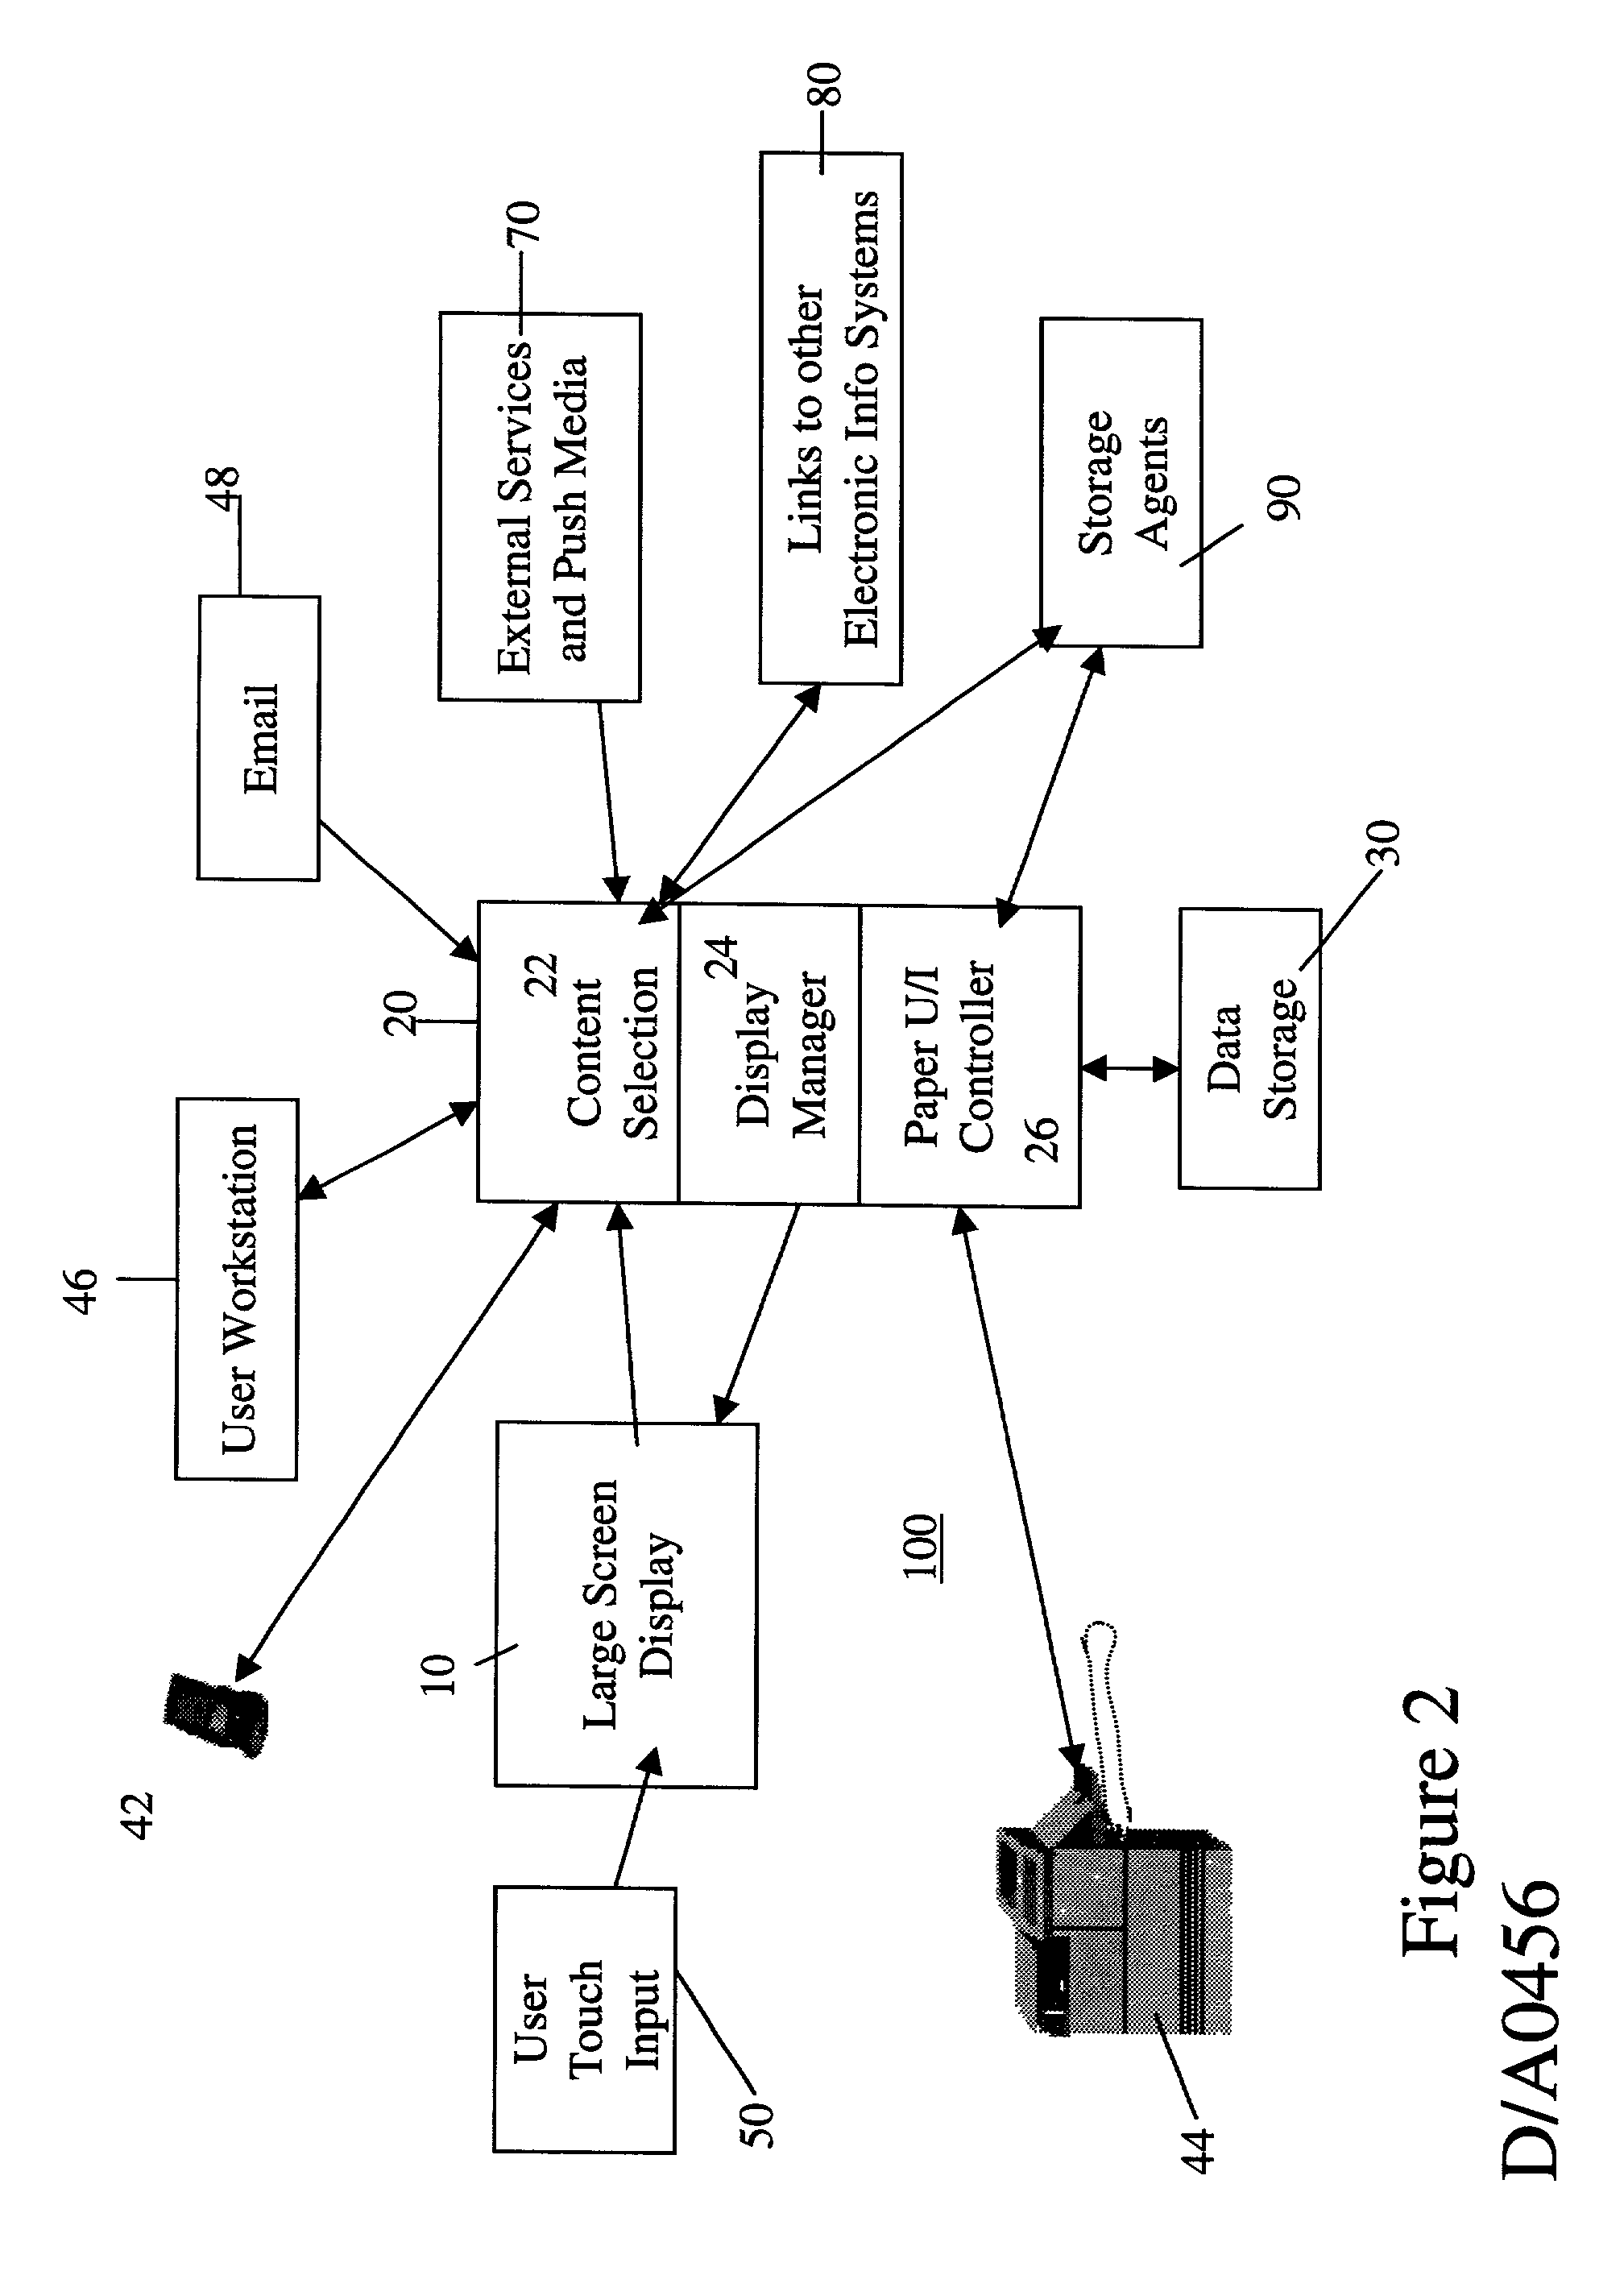 Electronic board system